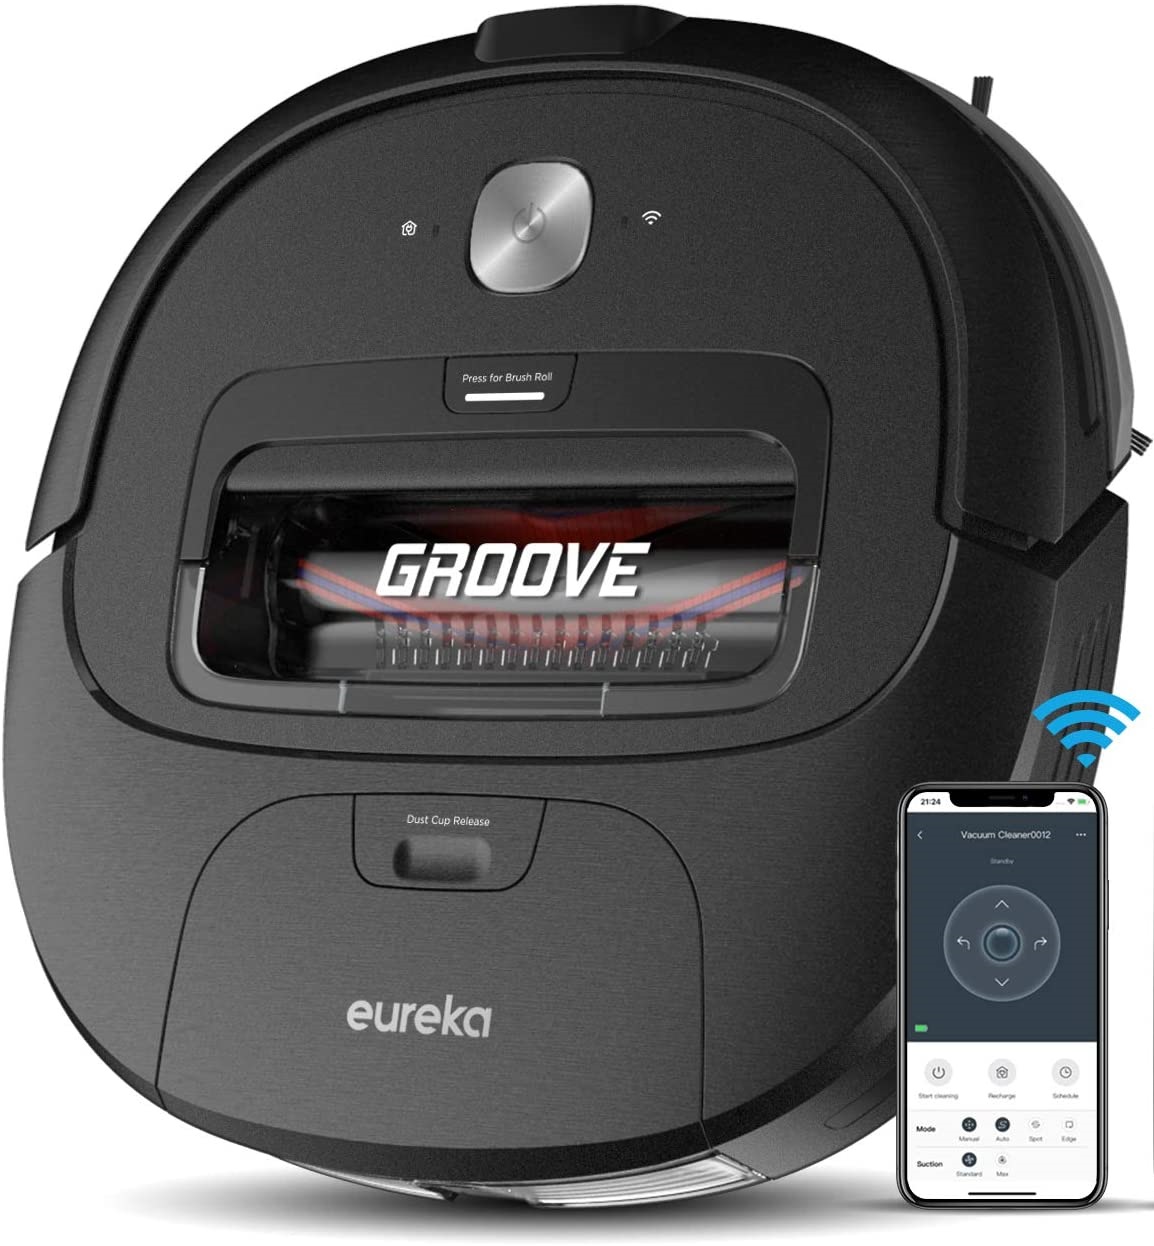 Read more about the article Eureka Groove Review